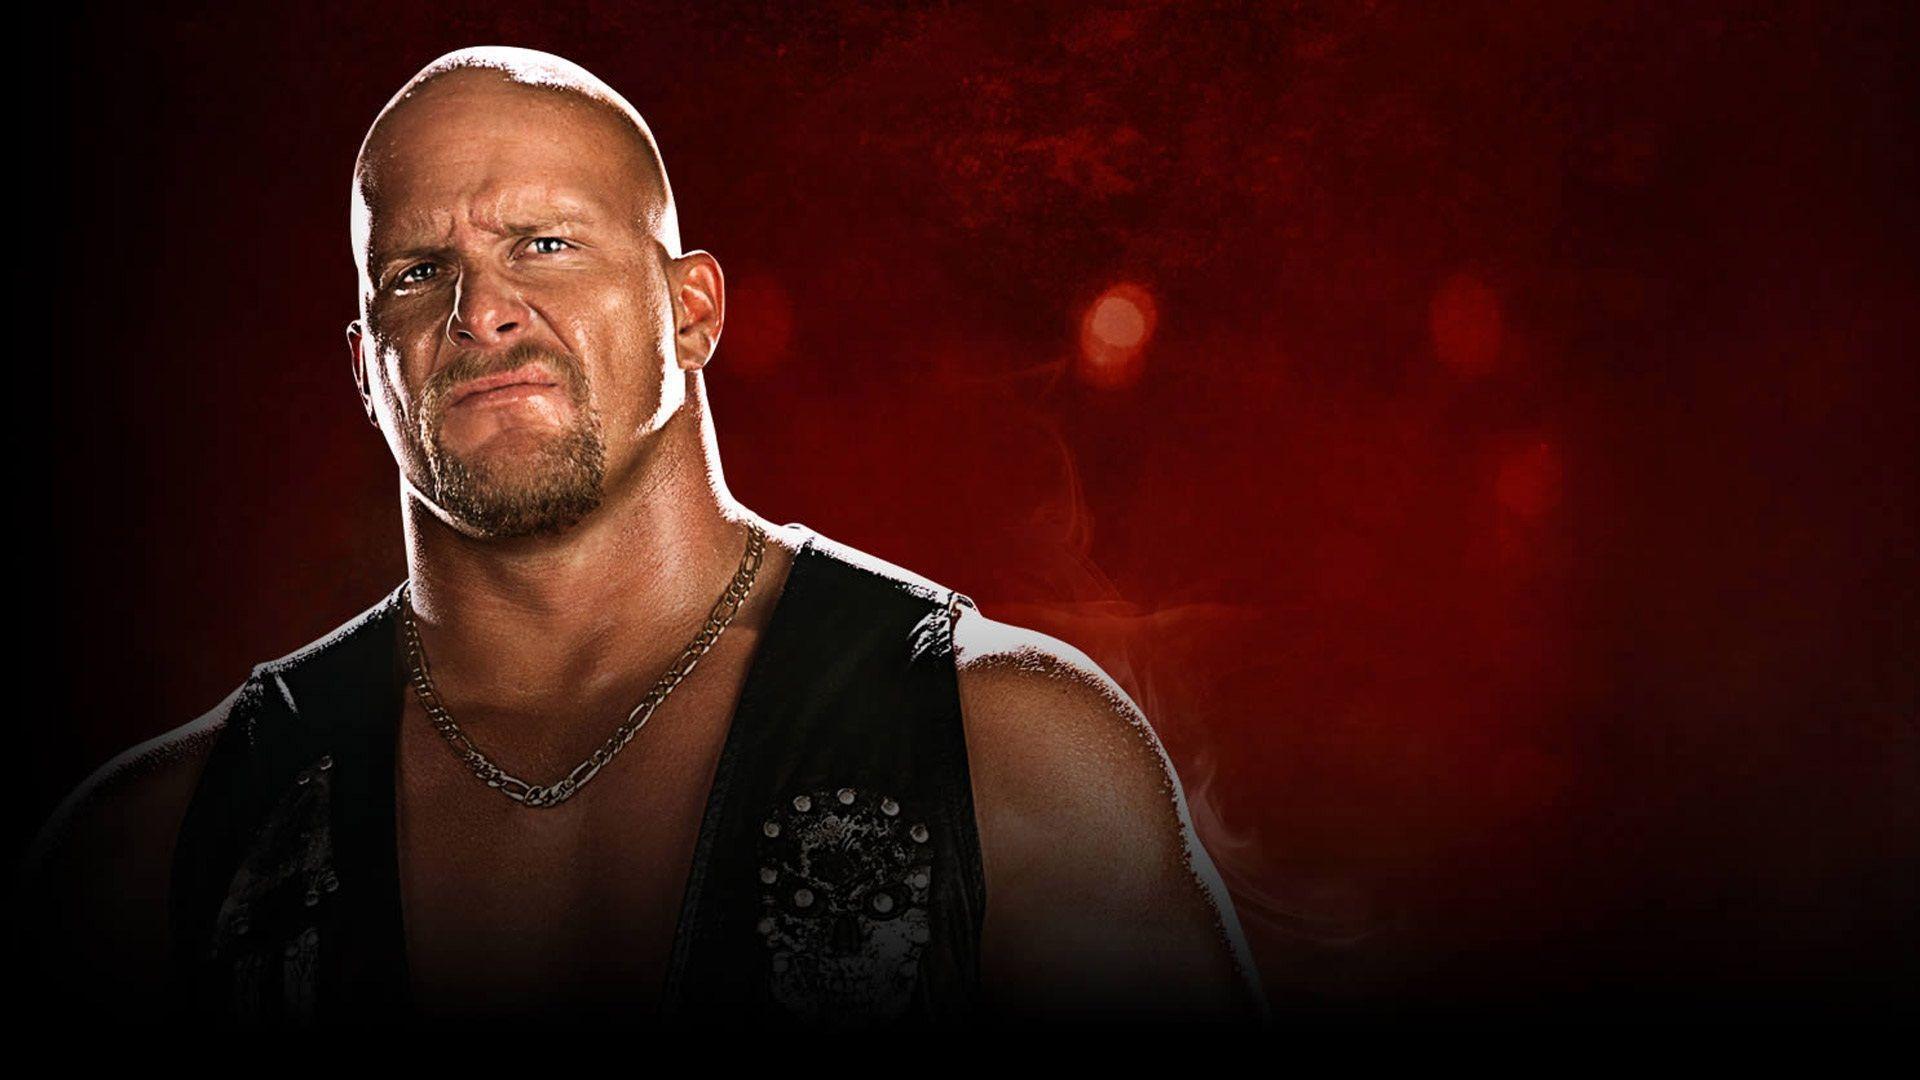 Stone Cold High Definition Wallpaper 09739